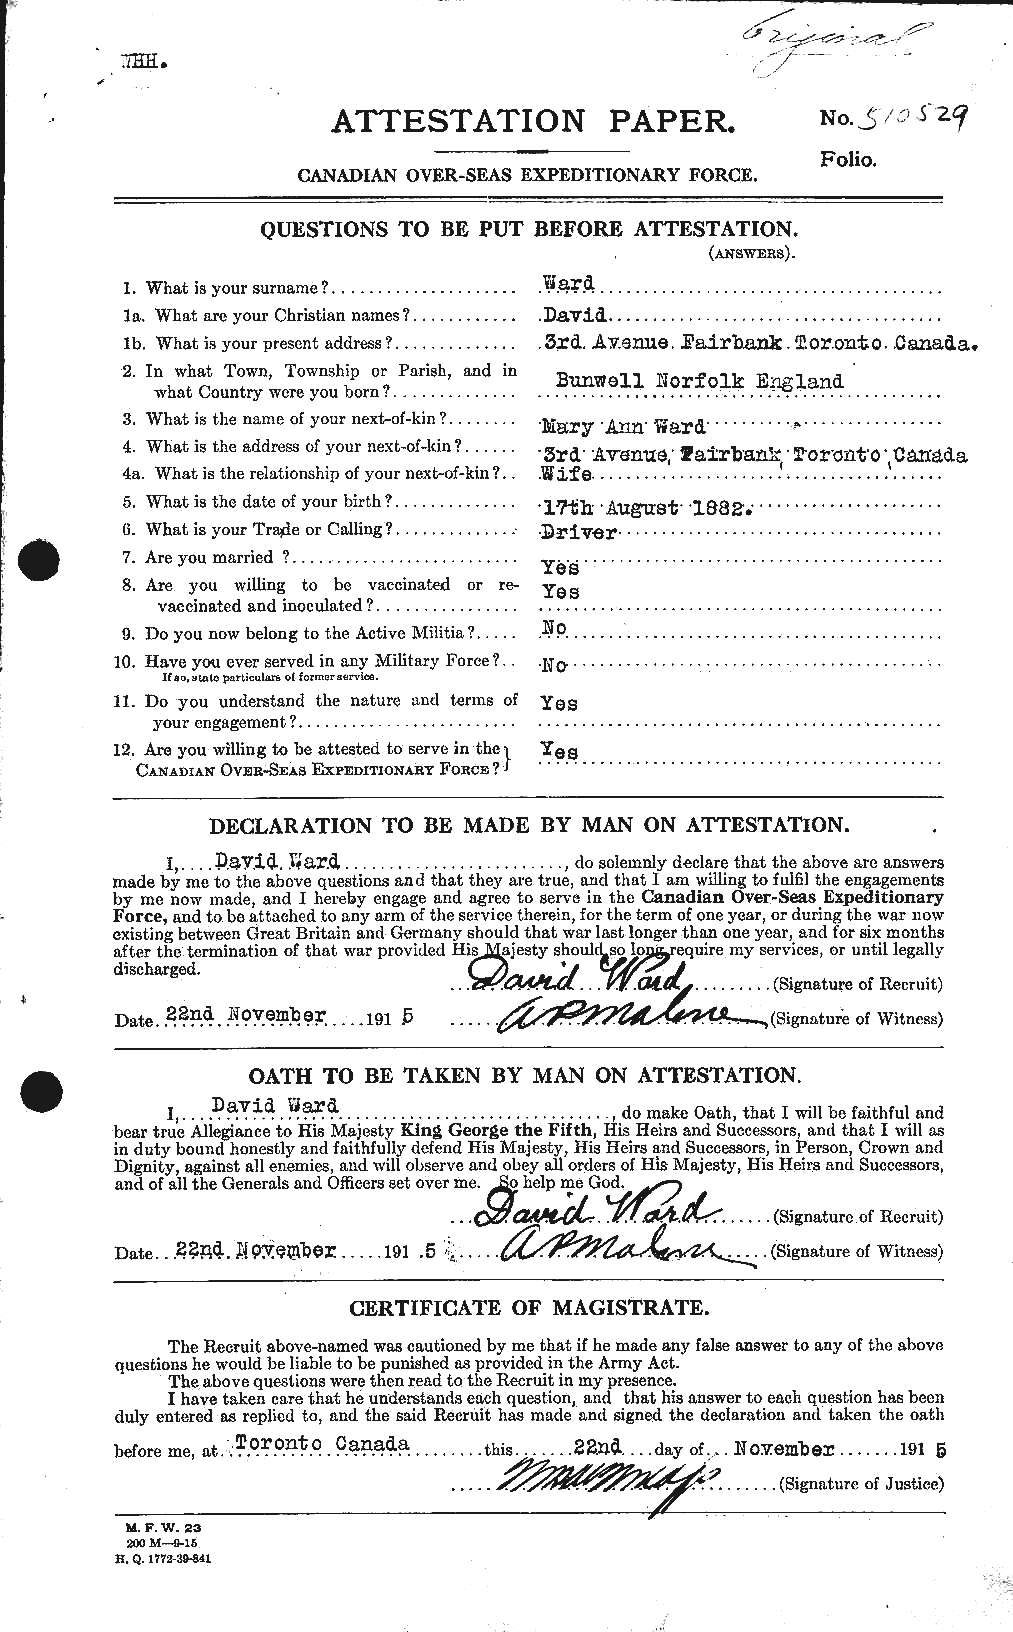 Personnel Records of the First World War - CEF 657617a